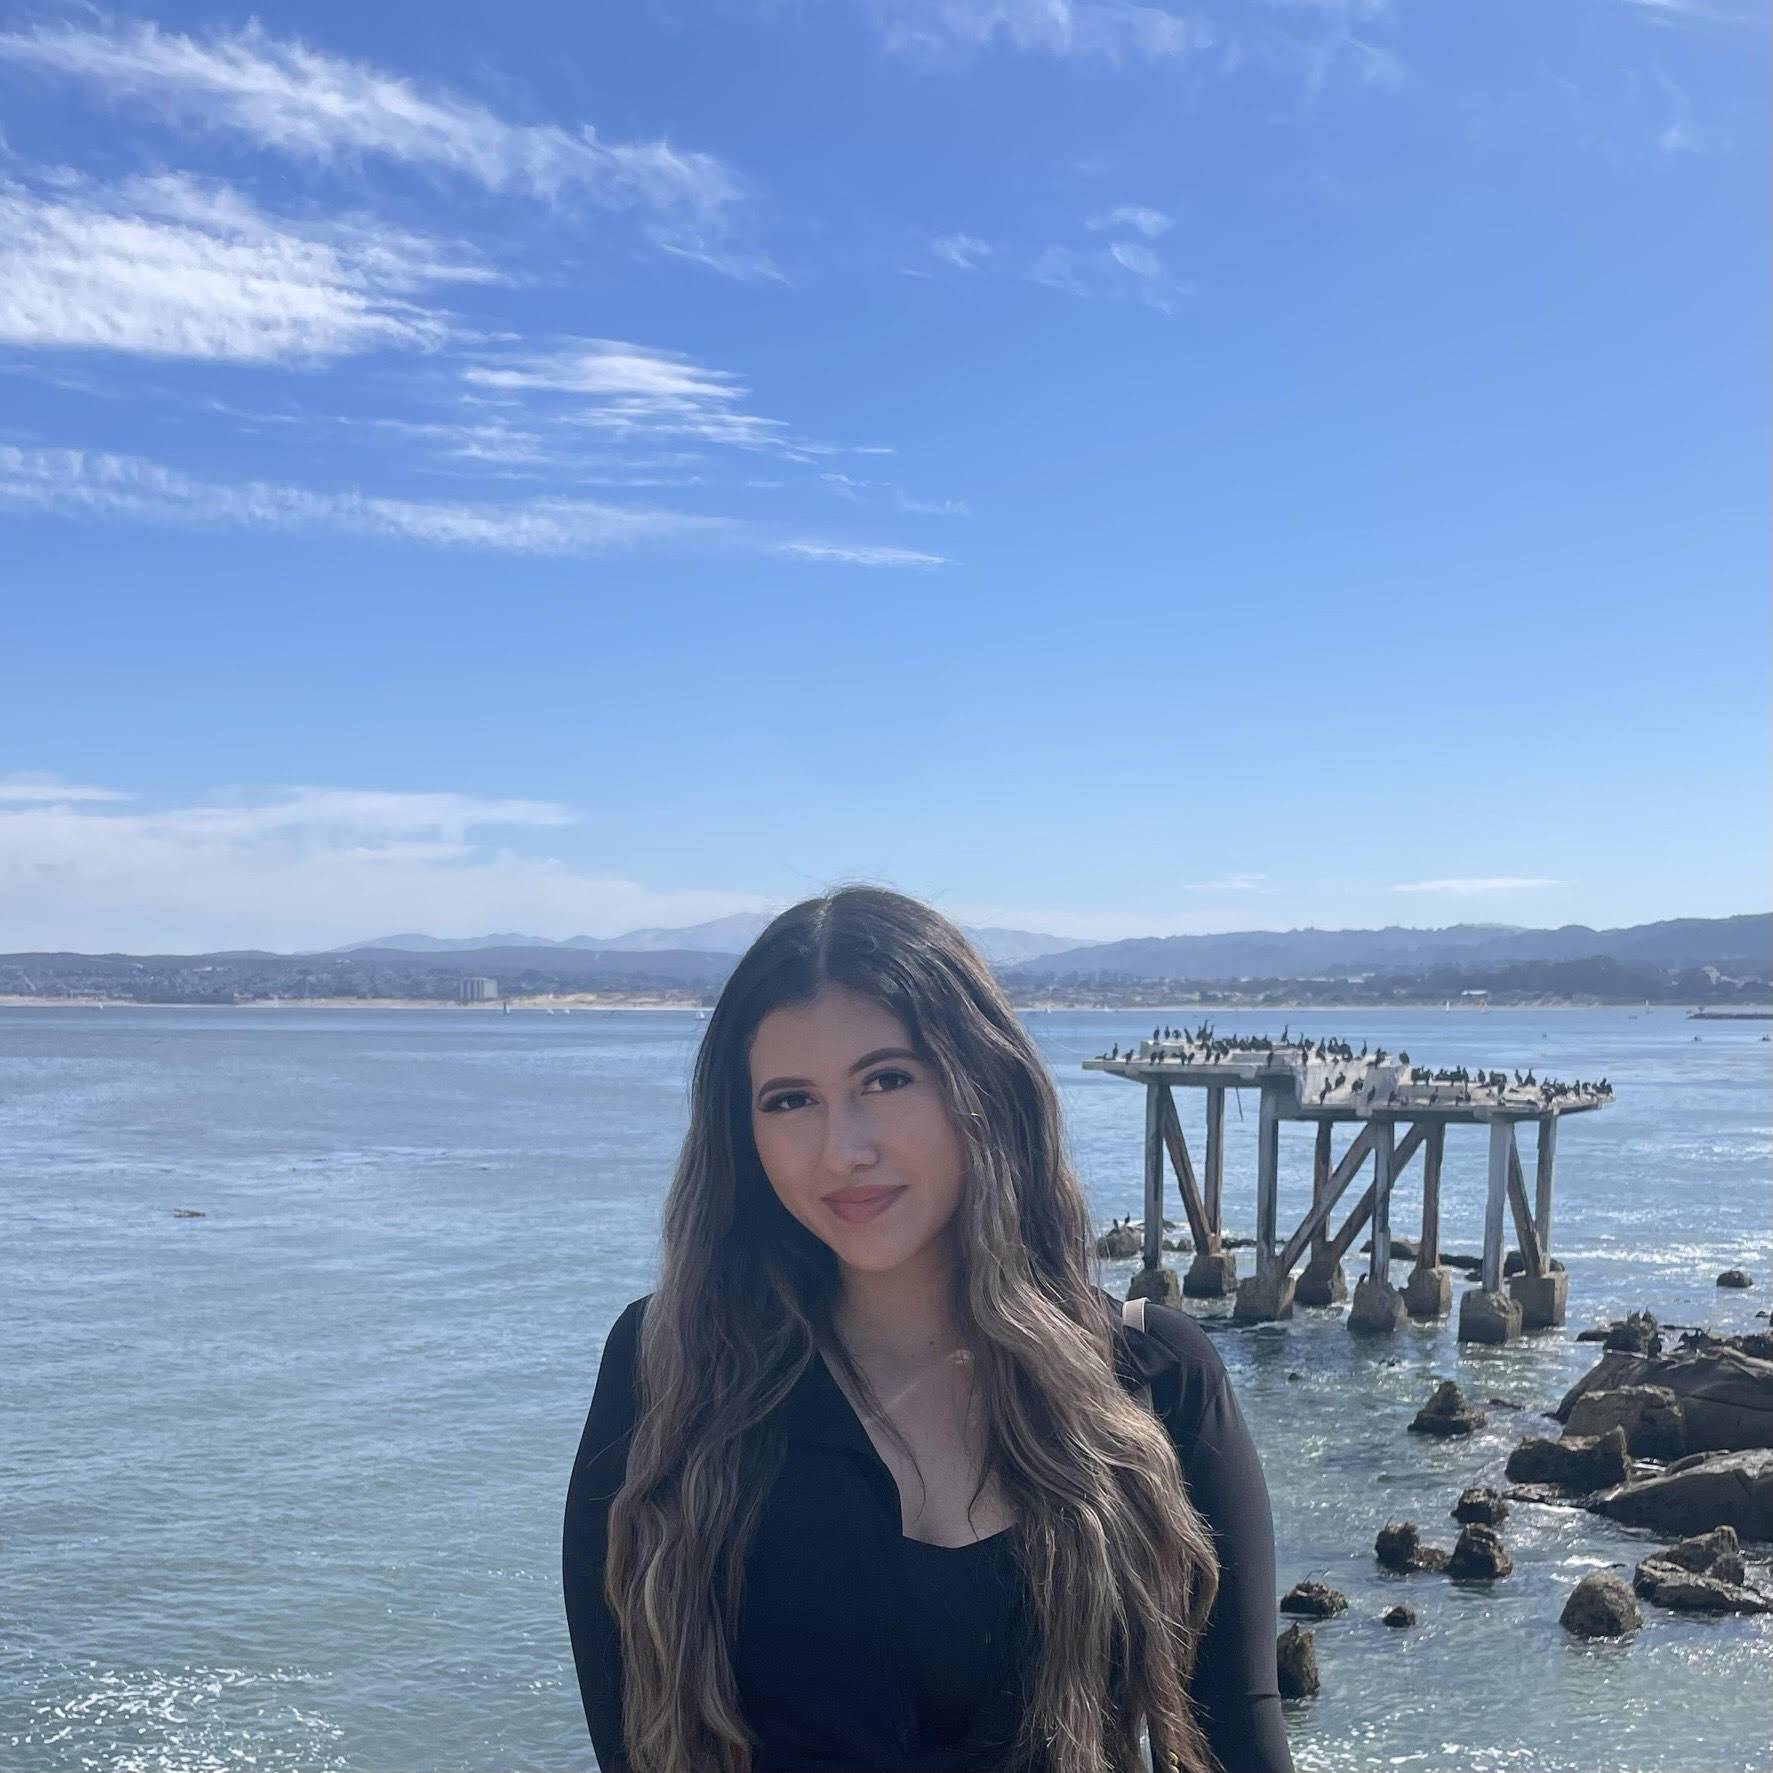 Hispanic woman, with long, brown hair, wearing black suit jacket, smiling, standing in front of sea-shore with wooden pier in background.